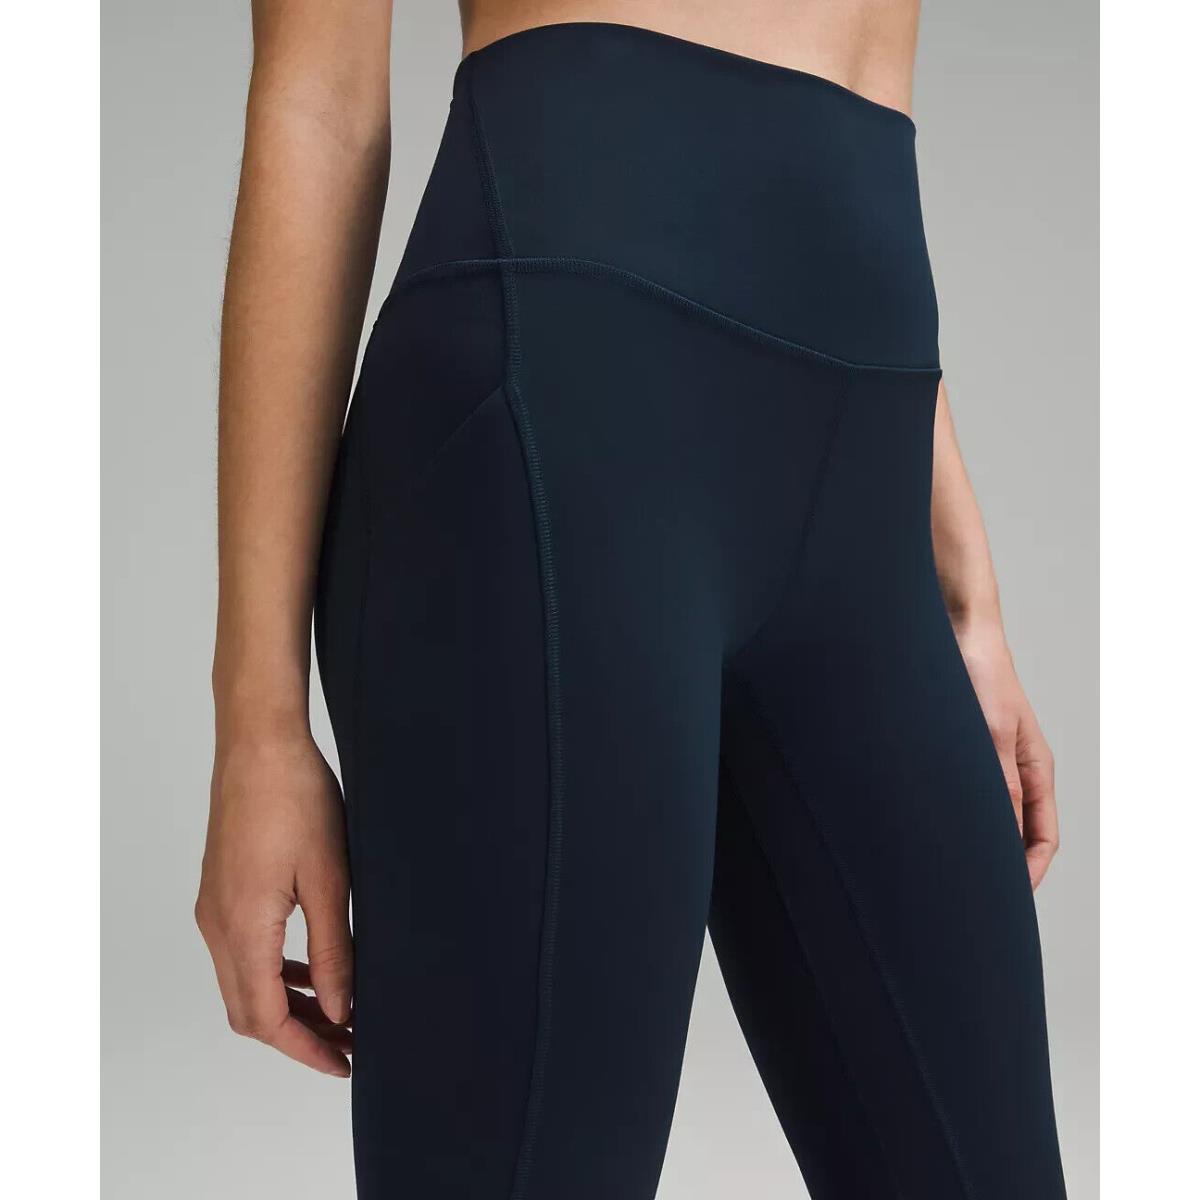 lululemon Align High-Rise Pant with Pockets 25 - True Navy - Size